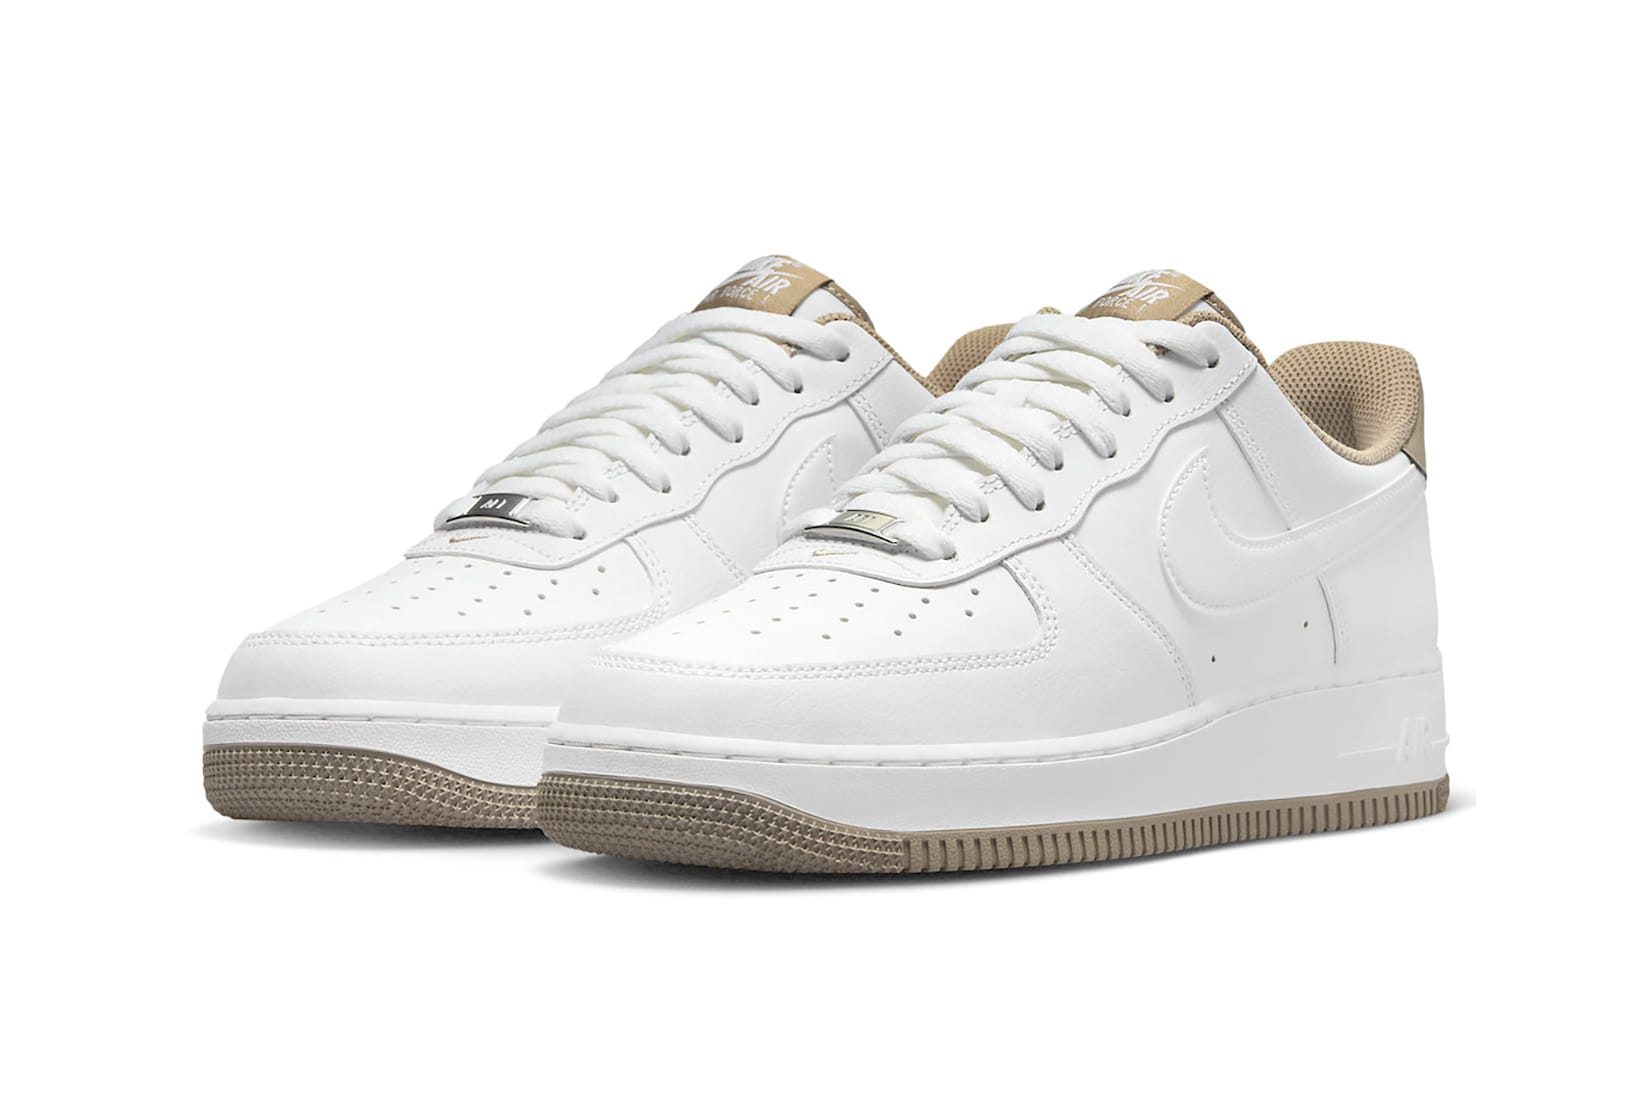 the new nike air force 1